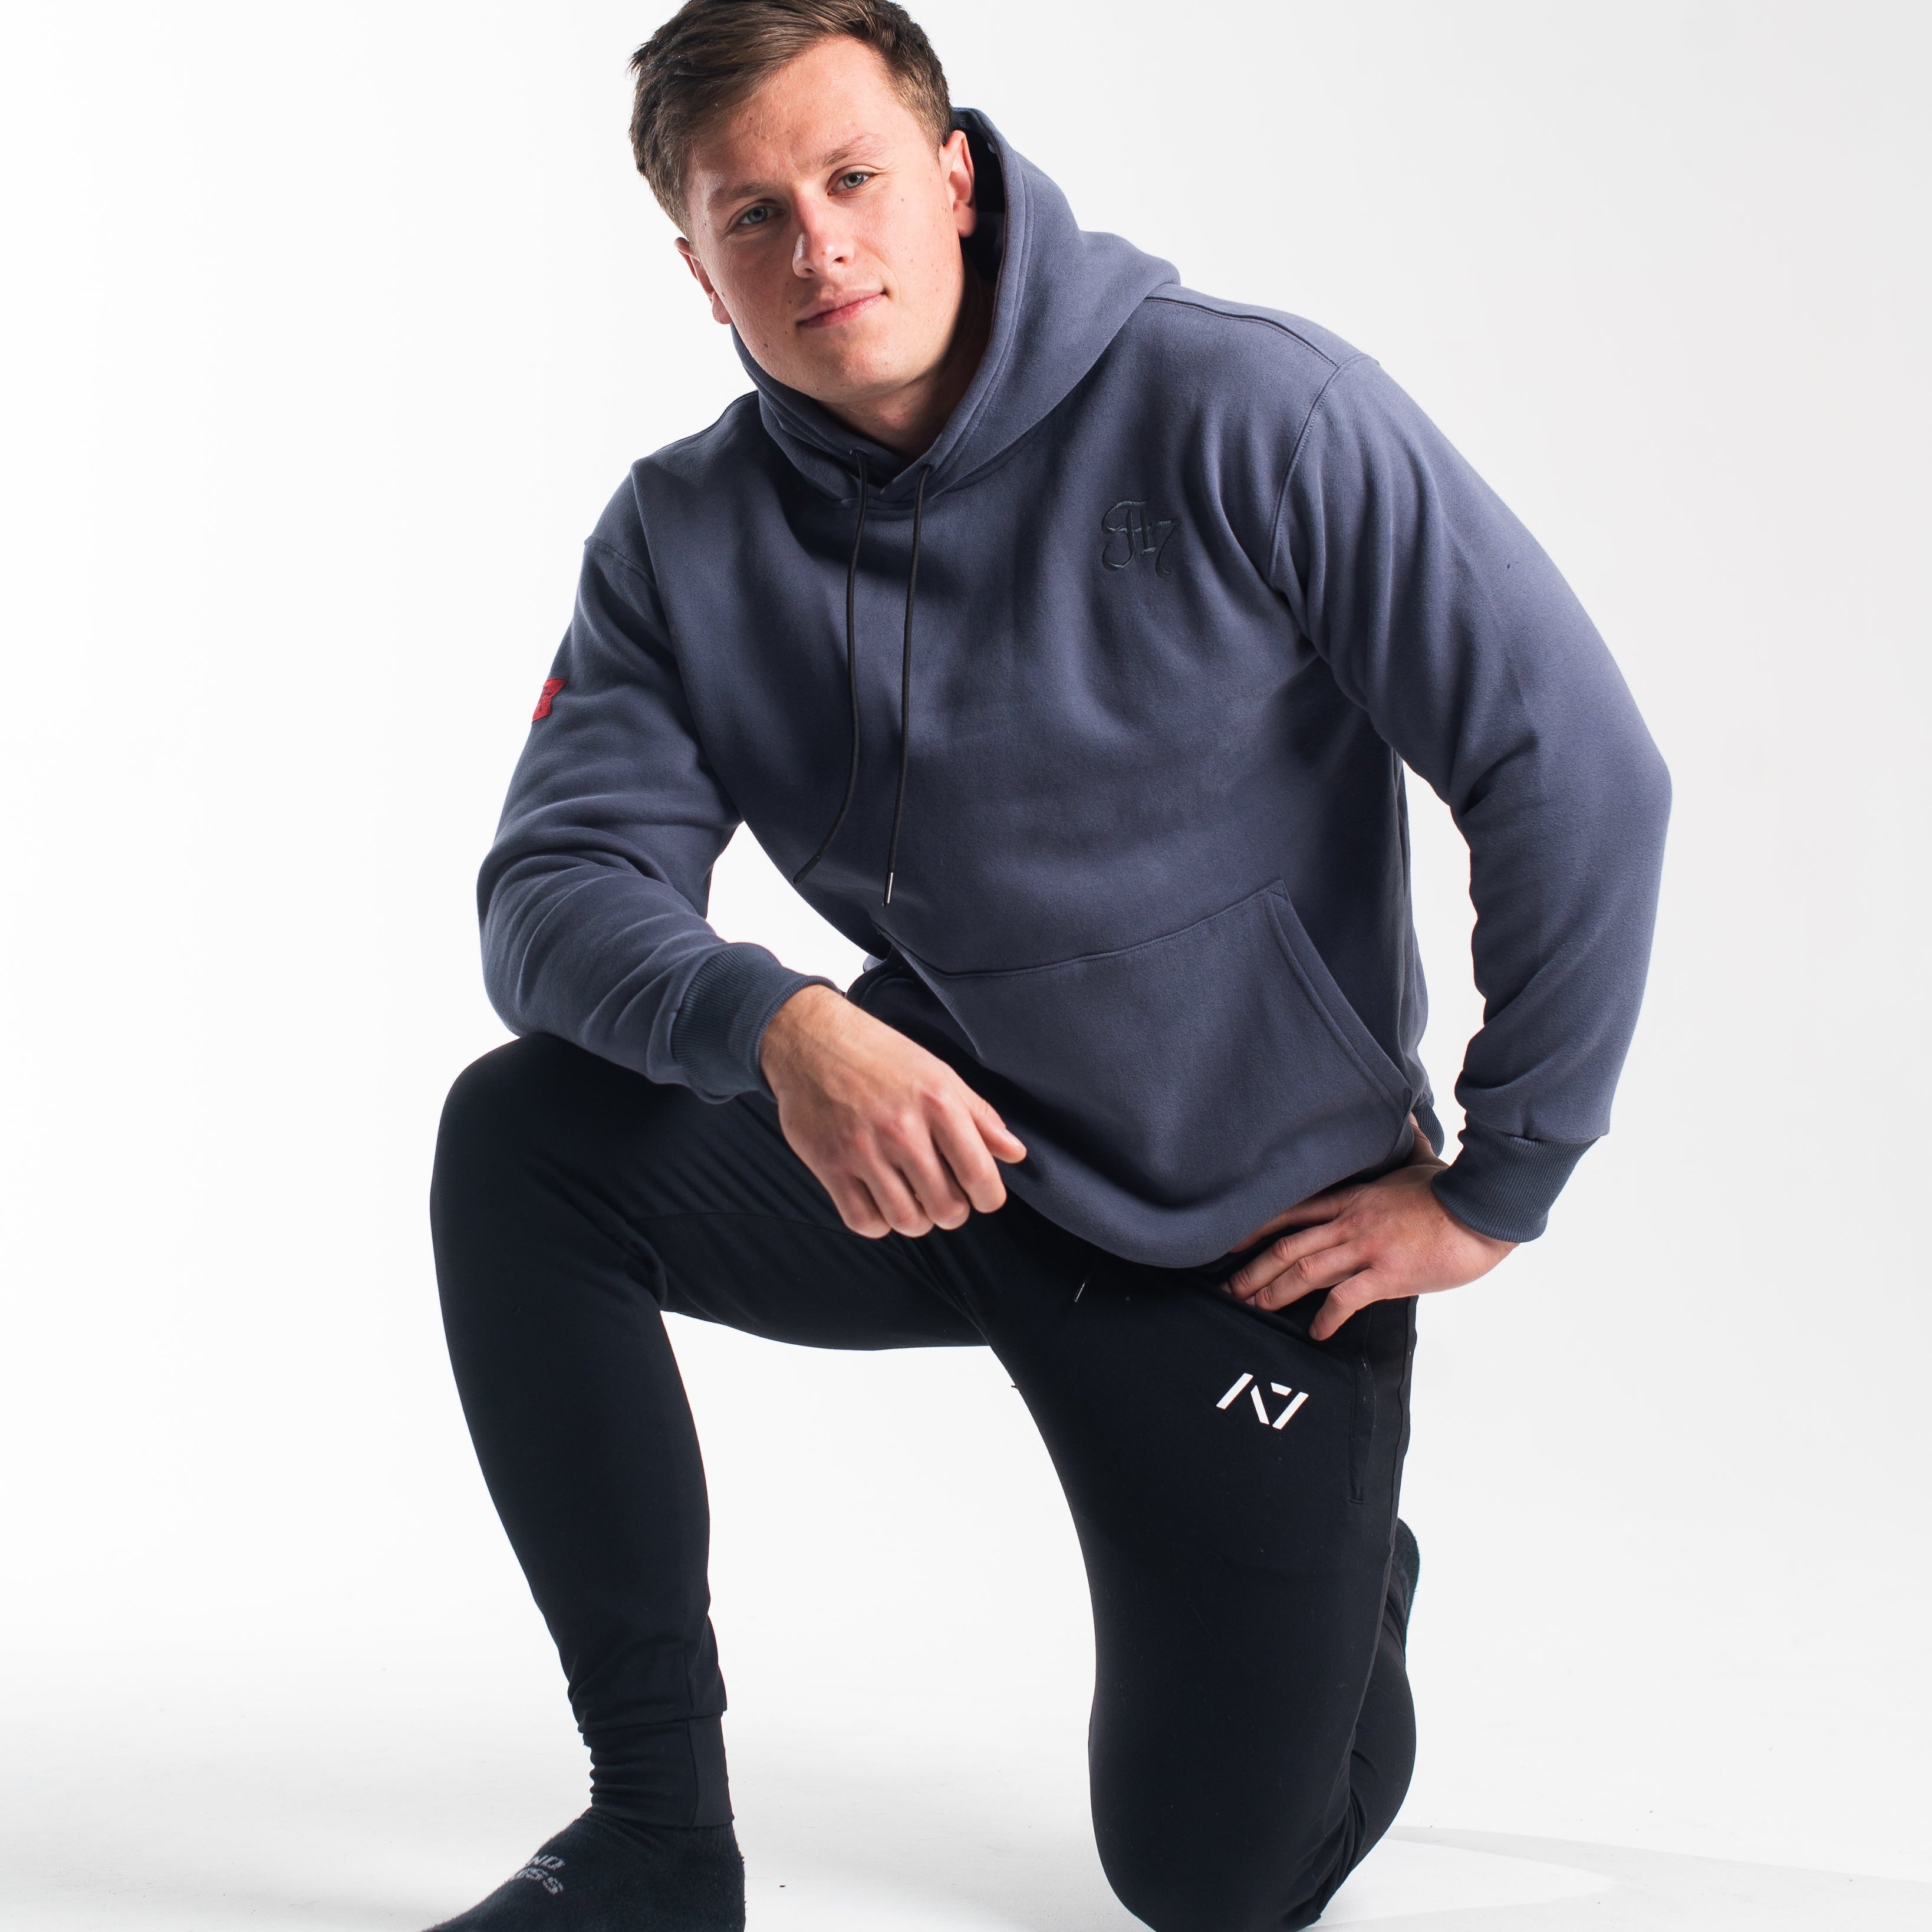 The Script collection was designed for daily comfort wear in and out the gym. All A7 Powerlifting Equipment shipping to UK, Norway, Switzerland and Iceland.